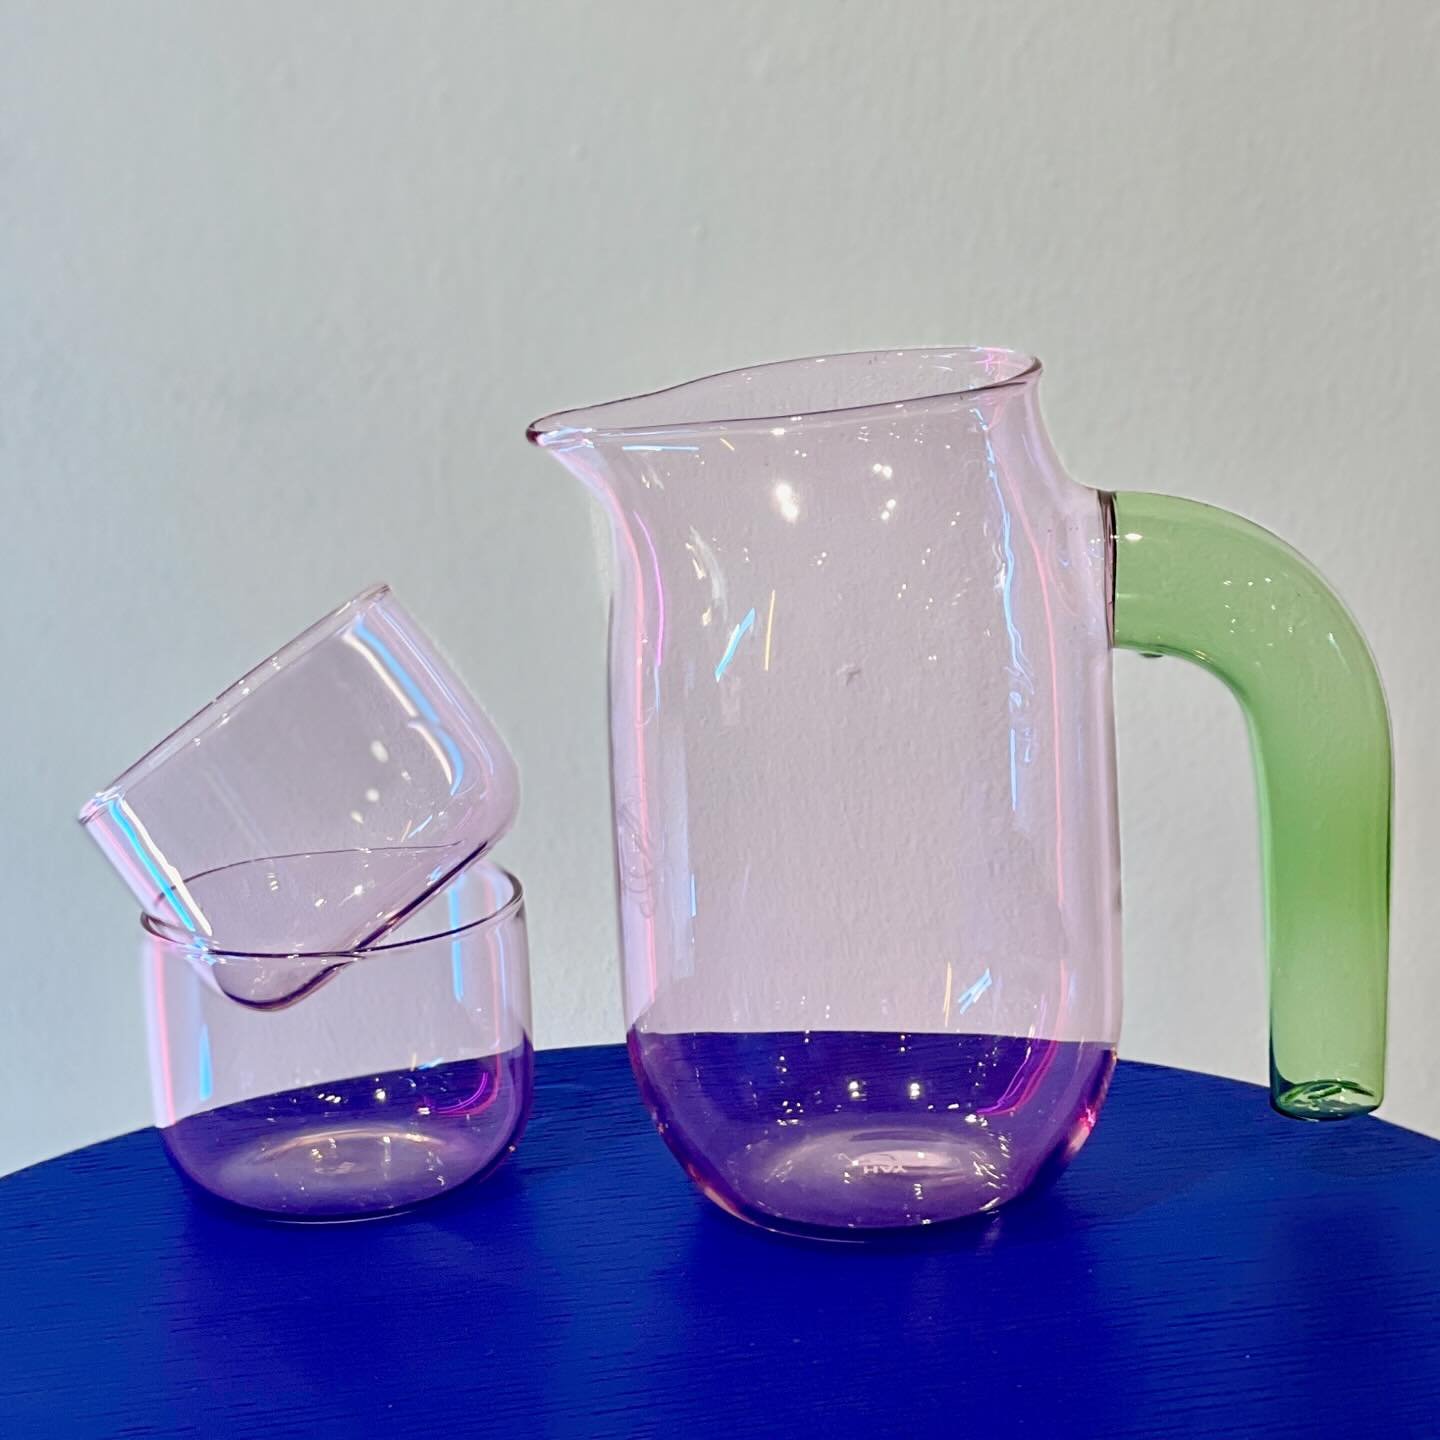 Bring an injection of colour into your home with these accessories from HAY! Now restocked at HOOS 💙

Tint tumblers: &pound;25
Jug designed by Jochen Holz: &pound;69

Chim Chim scent diffuser (Red, Off-white, Blue): &pound;35

Borosilicate Jug - Sma